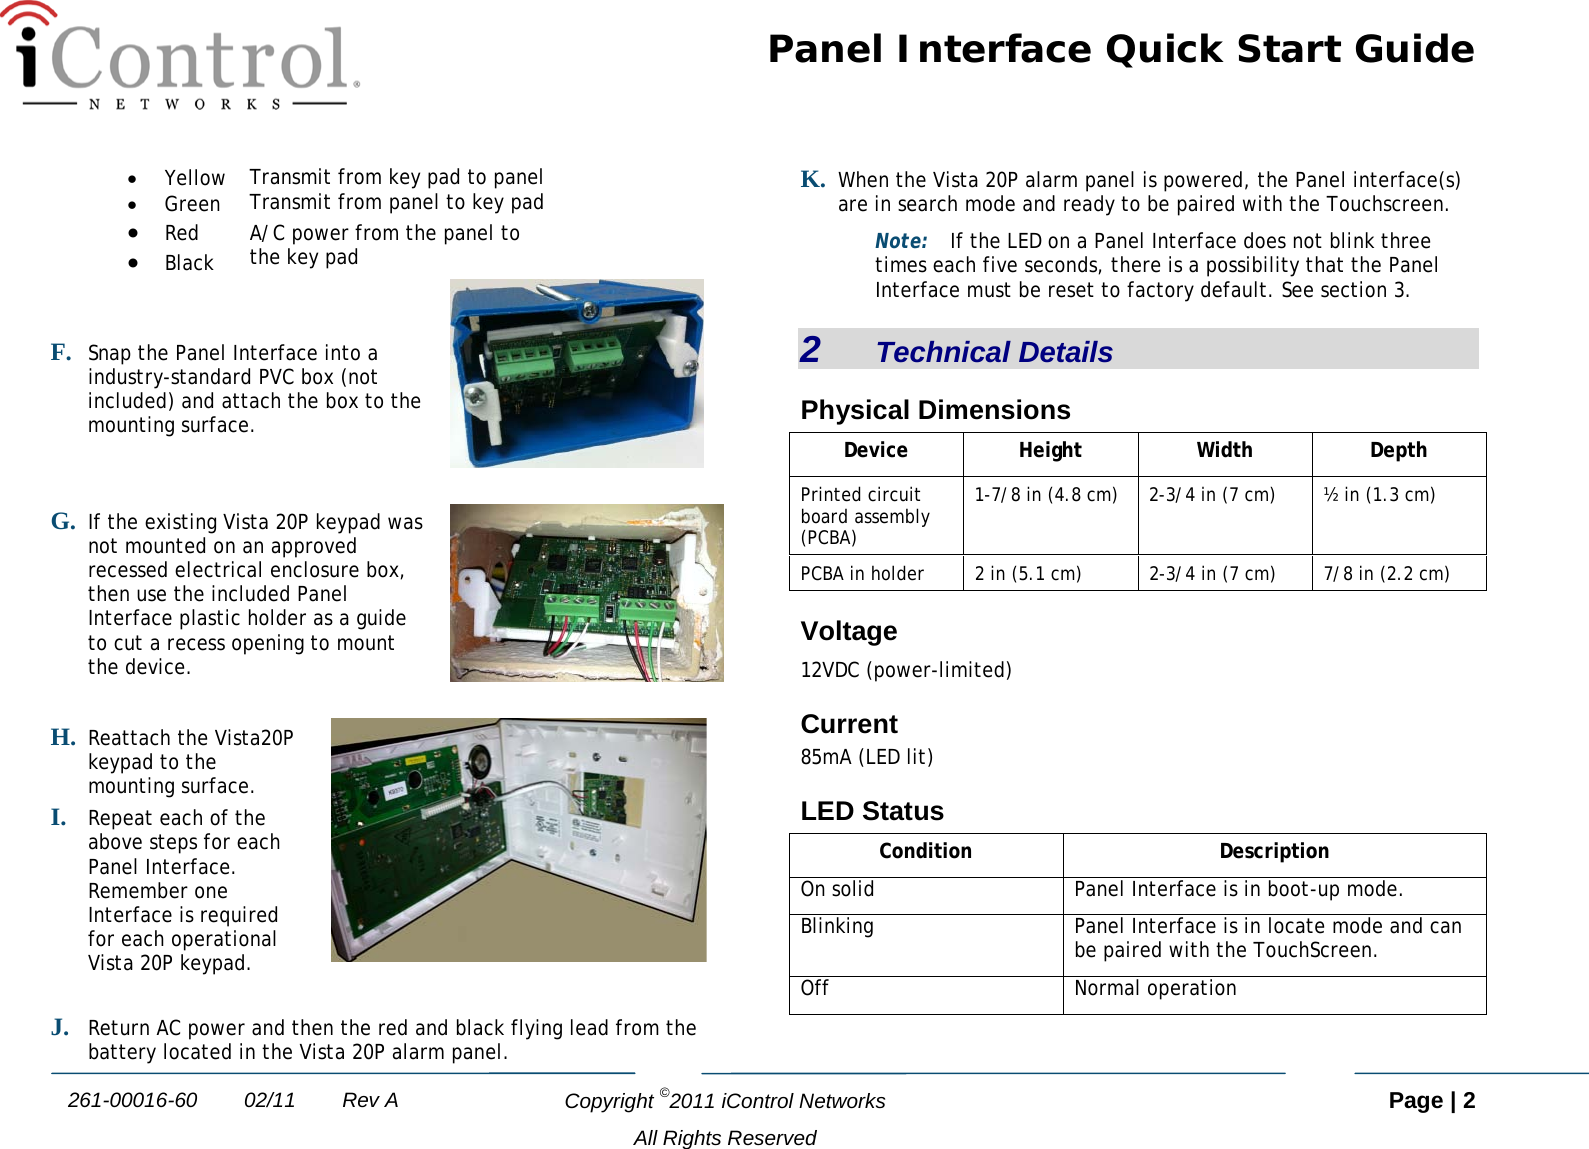 Panel Interface Quick Start Guide   Copyright ©2011 iControl Networks   Page | 2  All Rights Reserved 261-00016-60        02/11        Rev A • Yellow Transmit from key pad to panel • Green Transmit from panel to key pad • Red A/C power from the panel to  the key pad • Black F. Snap the Panel Interface into a industry-standard PVC box (not included) and attach the box to the mounting surface.   G. If the existing Vista 20P keypad was not mounted on an approved recessed electrical enclosure box, then use the included Panel Interface plastic holder as a guide to cut a recess opening to mount the device.   H. Reattach the Vista20P keypad to the mounting surface. I. Repeat each of the above steps for each Panel Interface. Remember one Interface is required for each operational Vista 20P keypad.   J. Return AC power and then the red and black flying lead from the battery located in the Vista 20P alarm panel. K. When the Vista 20P alarm panel is powered, the Panel interface(s) are in search mode and ready to be paired with the Touchscreen.  Note: If the LED on a Panel Interface does not blink three times each five seconds, there is a possibility that the Panel Interface must be reset to factory default. See section 3. 2   Technical Details Physical Dimensions Device Height Width Depth Printed circuit board assembly (PCBA) 1-7/8 in (4.8 cm)  2-3/4 in (7 cm)  ½ in (1.3 cm) PCBA in holder 2 in (5.1 cm)  2-3/4 in (7 cm)  7/8 in (2.2 cm) Voltage 12VDC (power-limited) Current 85mA (LED lit) LED Status Condition  Description On solid Panel Interface is in boot-up mode. Blinking Panel Interface is in locate mode and can be paired with the TouchScreen. Off Normal operation  